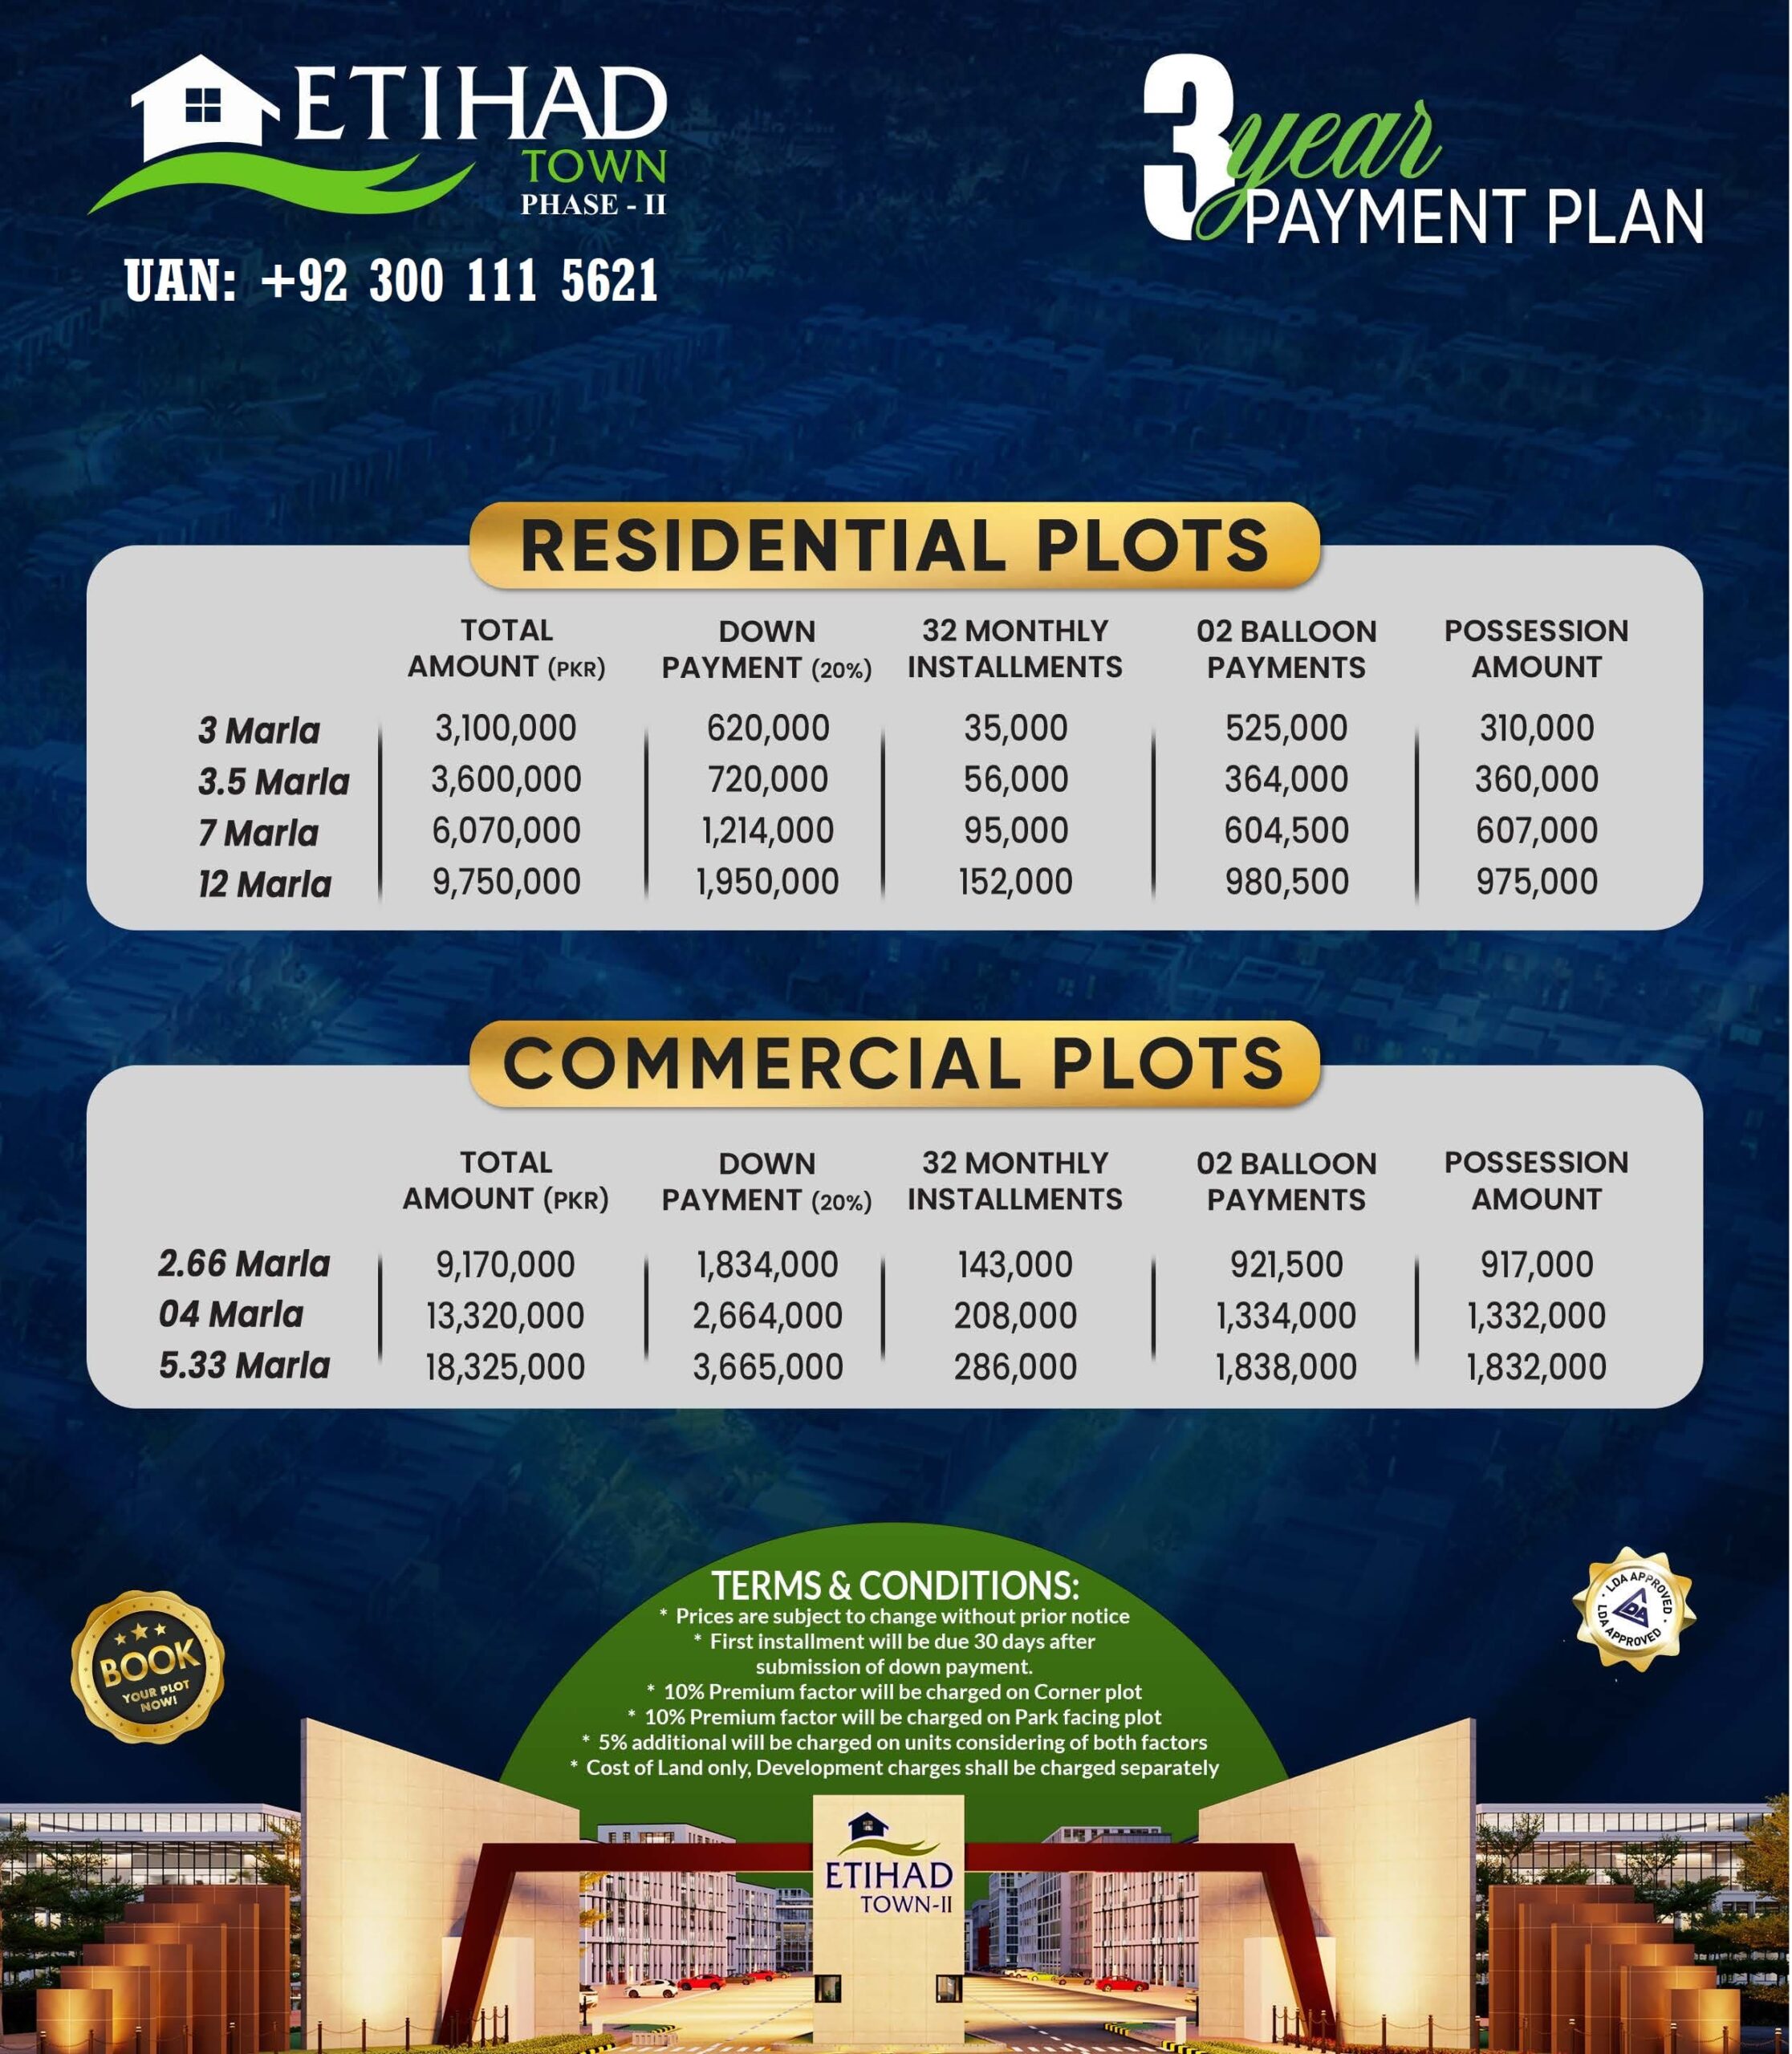 Etihad Town Phase 2 Payment Plan for 3M, 7M & 12M Plots